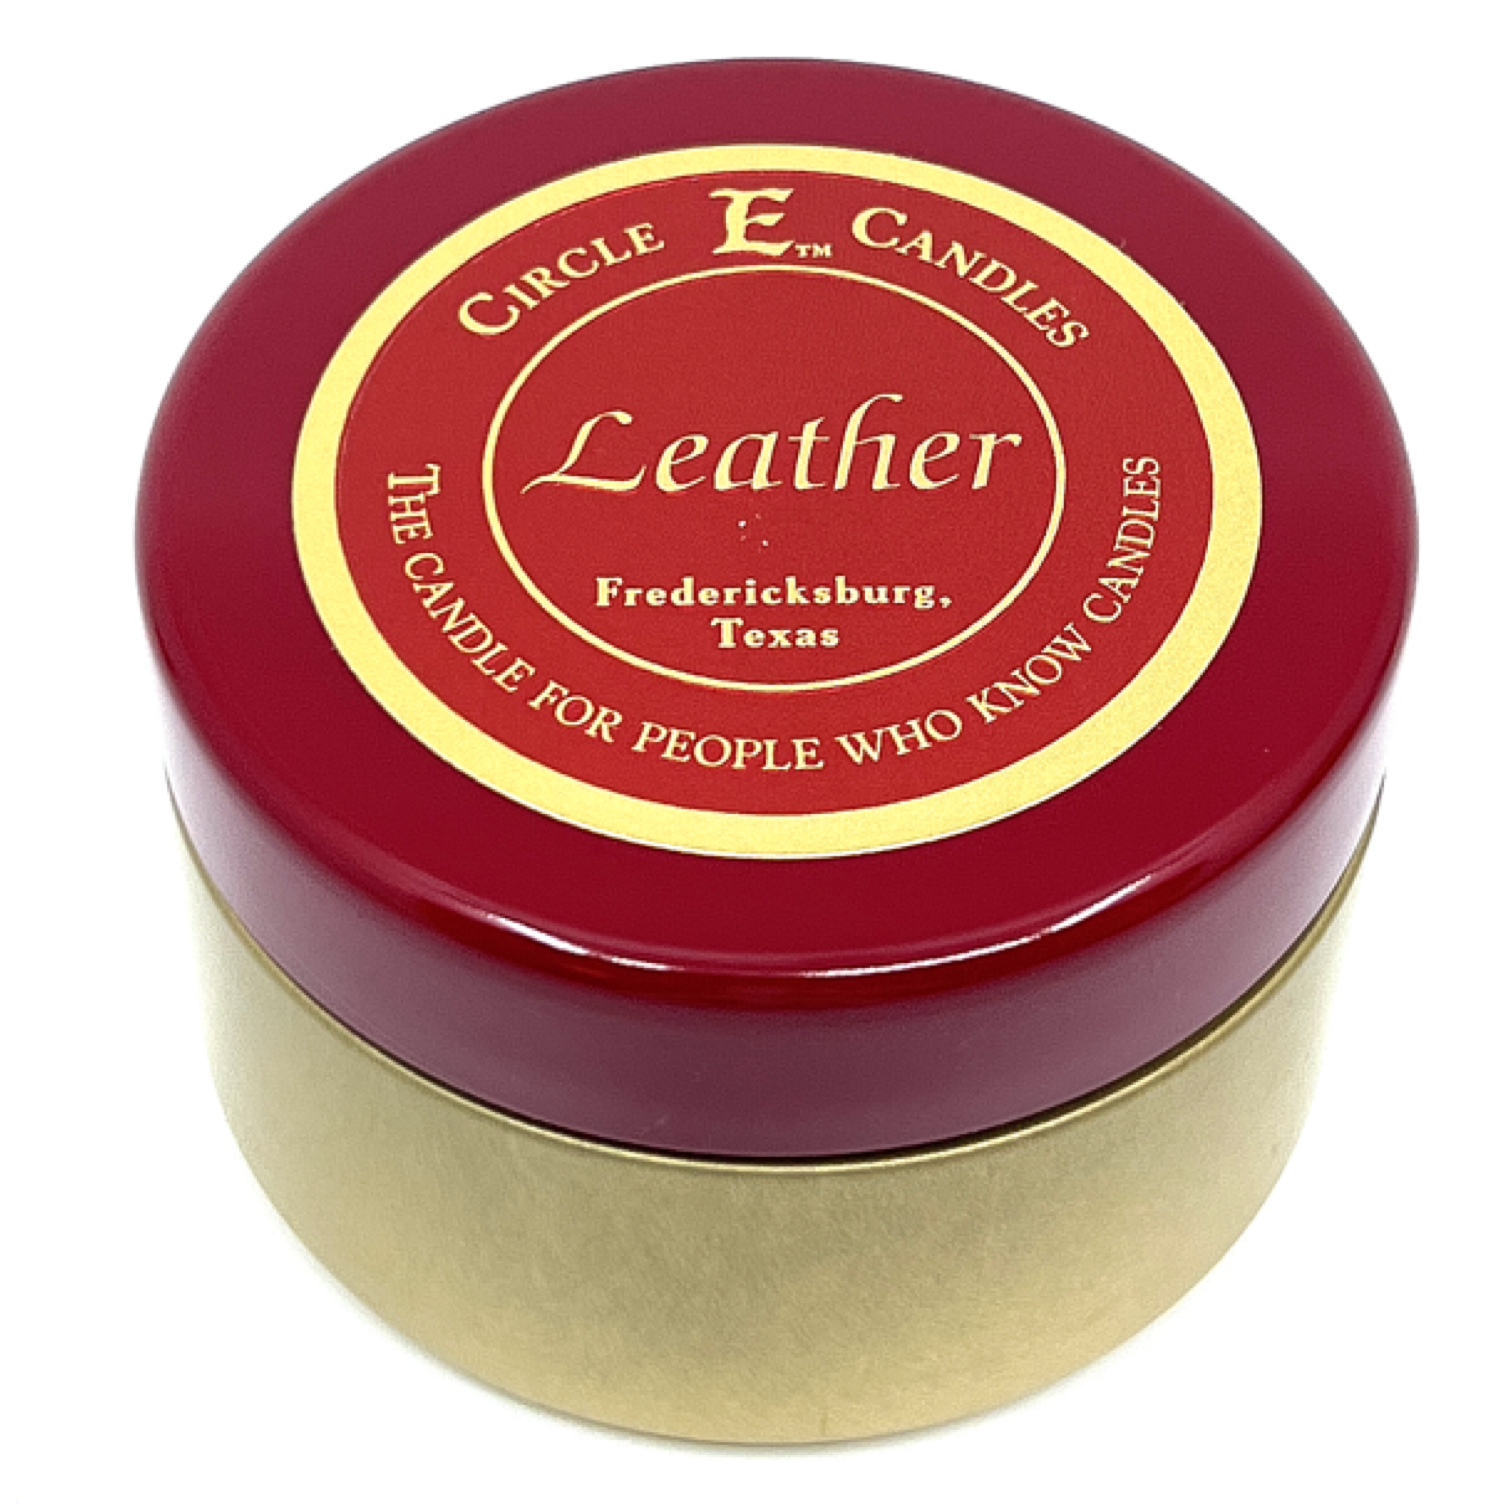 Circle E Candles, Leather Scent, Extra Small Size Travel Tin Candle, 4oz, 1 Wick